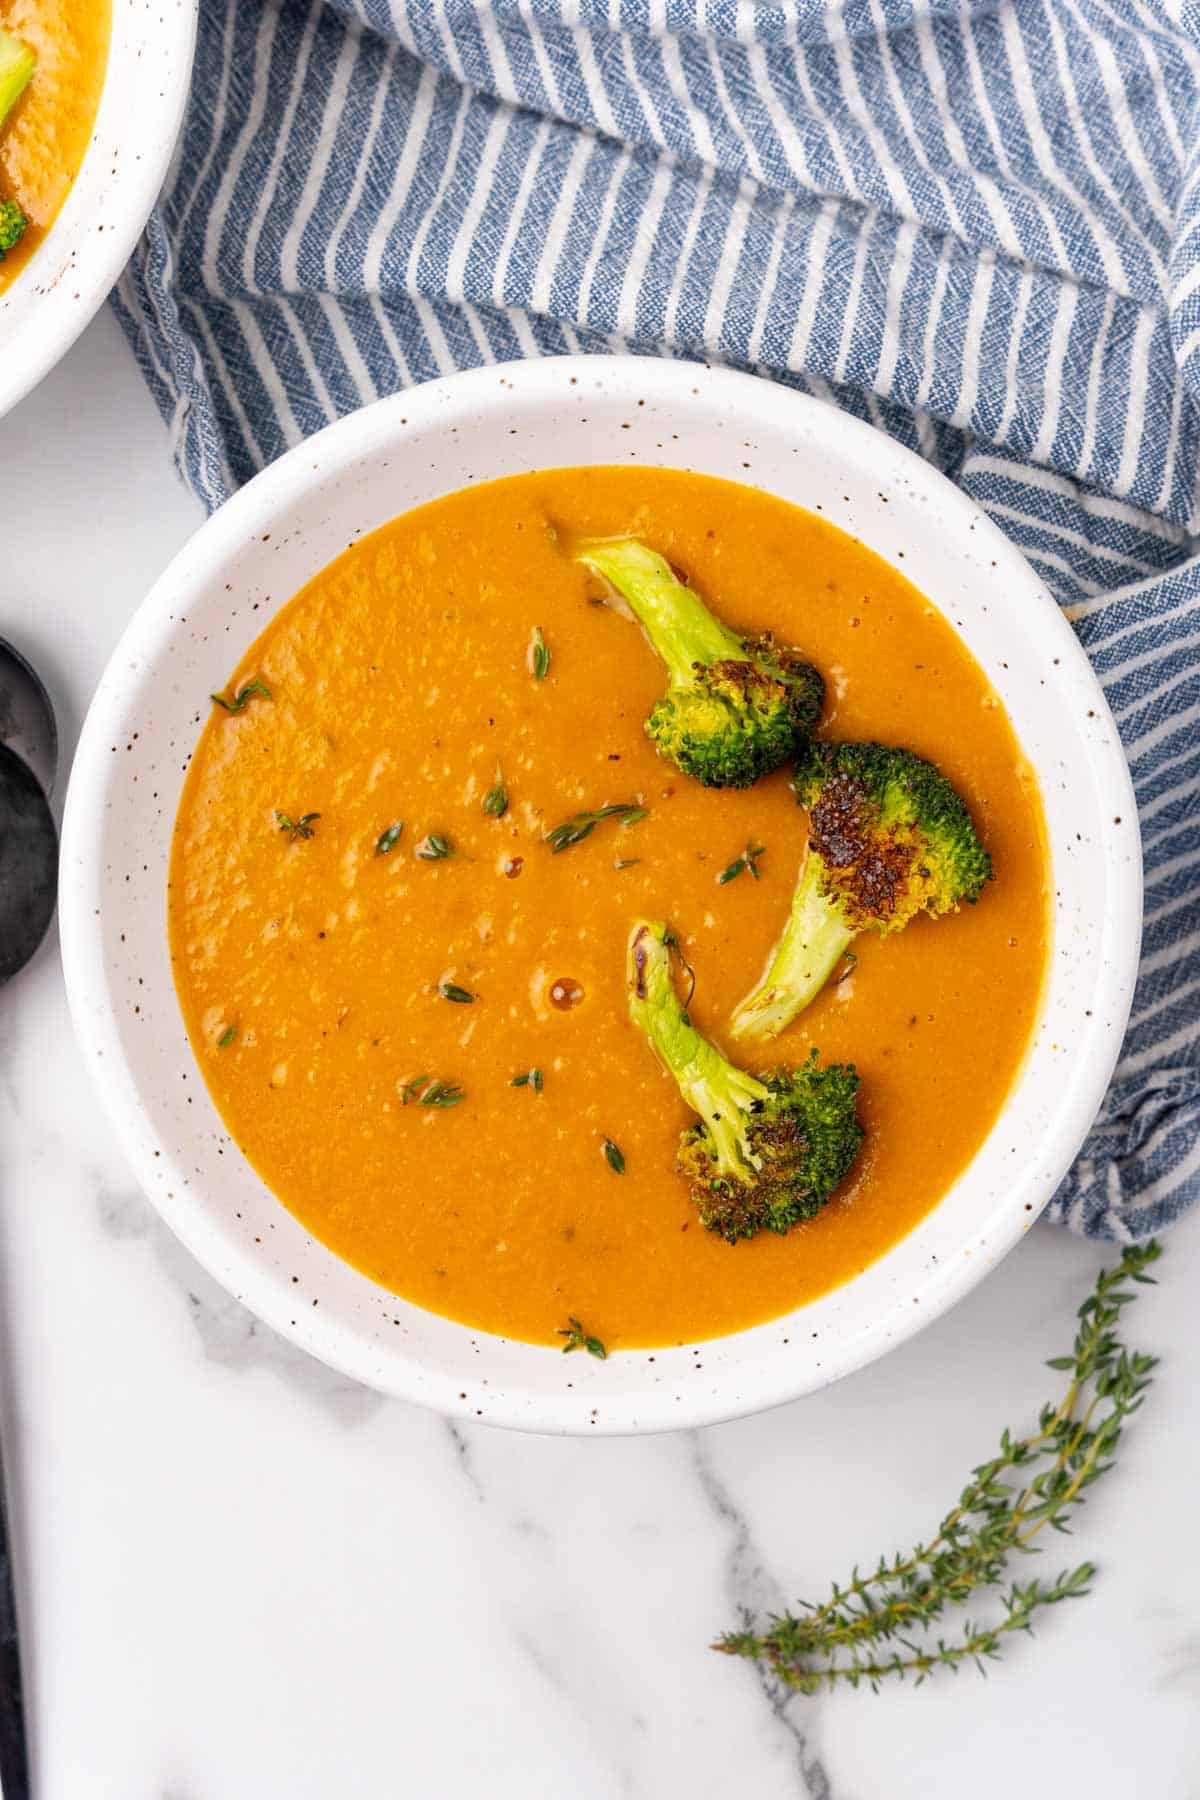 Orange bell pepper soup with roasted broccoli florets on top in a white speckled bowl on a white marble countertop next to a blue striped cloth napkin and a sprig of thyme